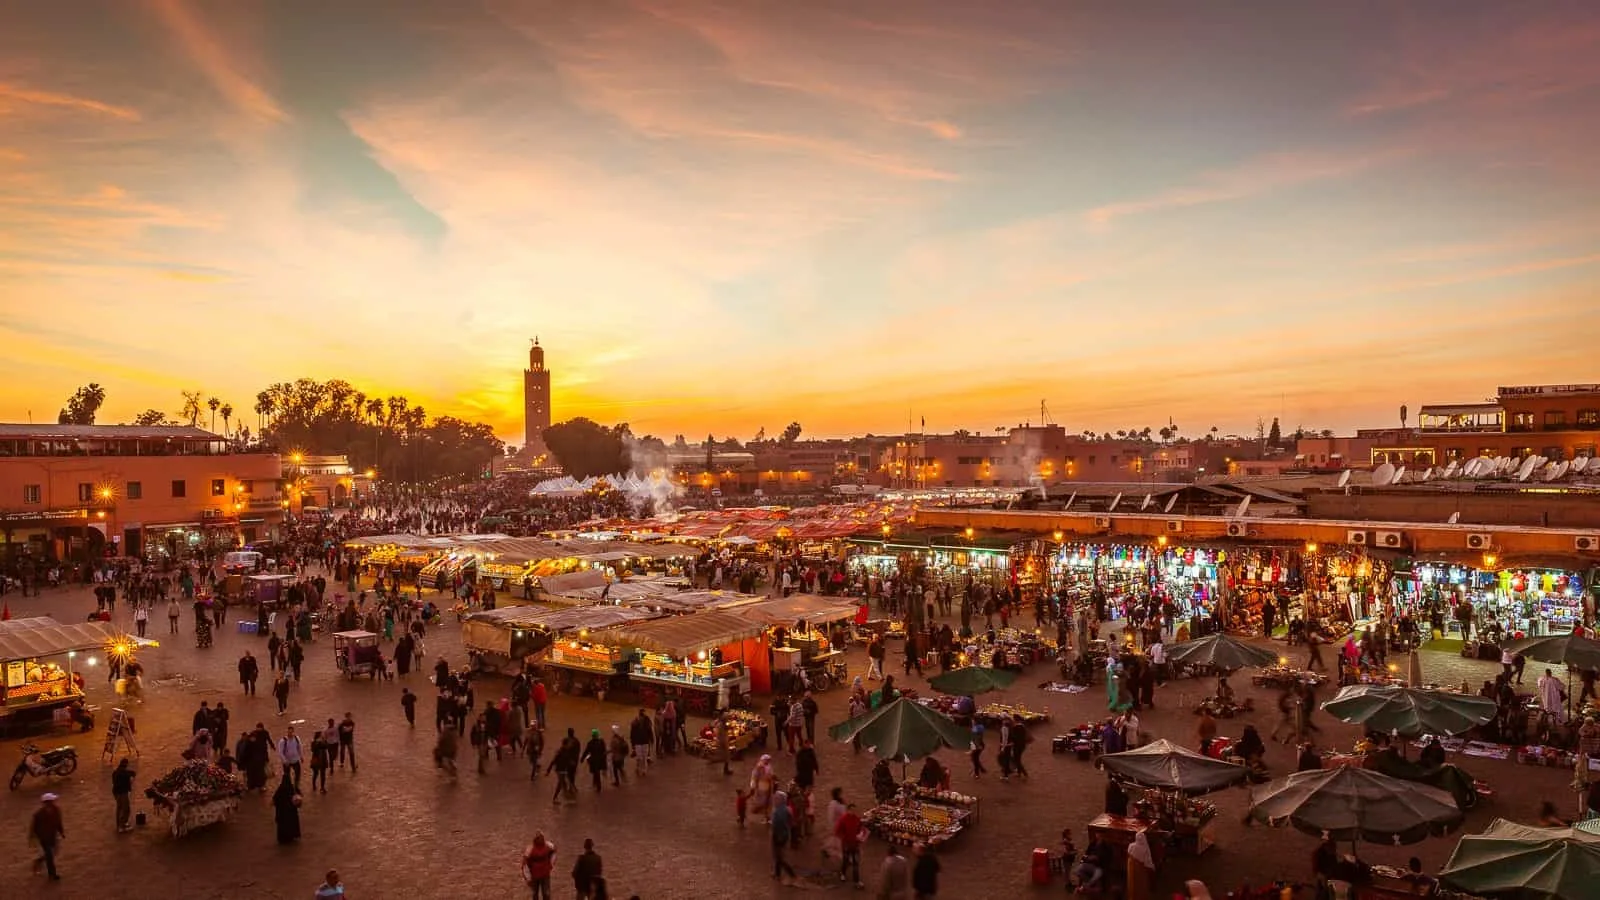 A comprehensive Morocco travel guide with tips and advice on things to do, see, camping locations, scenic drives and road trip itineraries. #Morocco #Travel #TravelGuide Follow the link for the full guide: //mowgli-adventures.com/morocco-travel-guide/